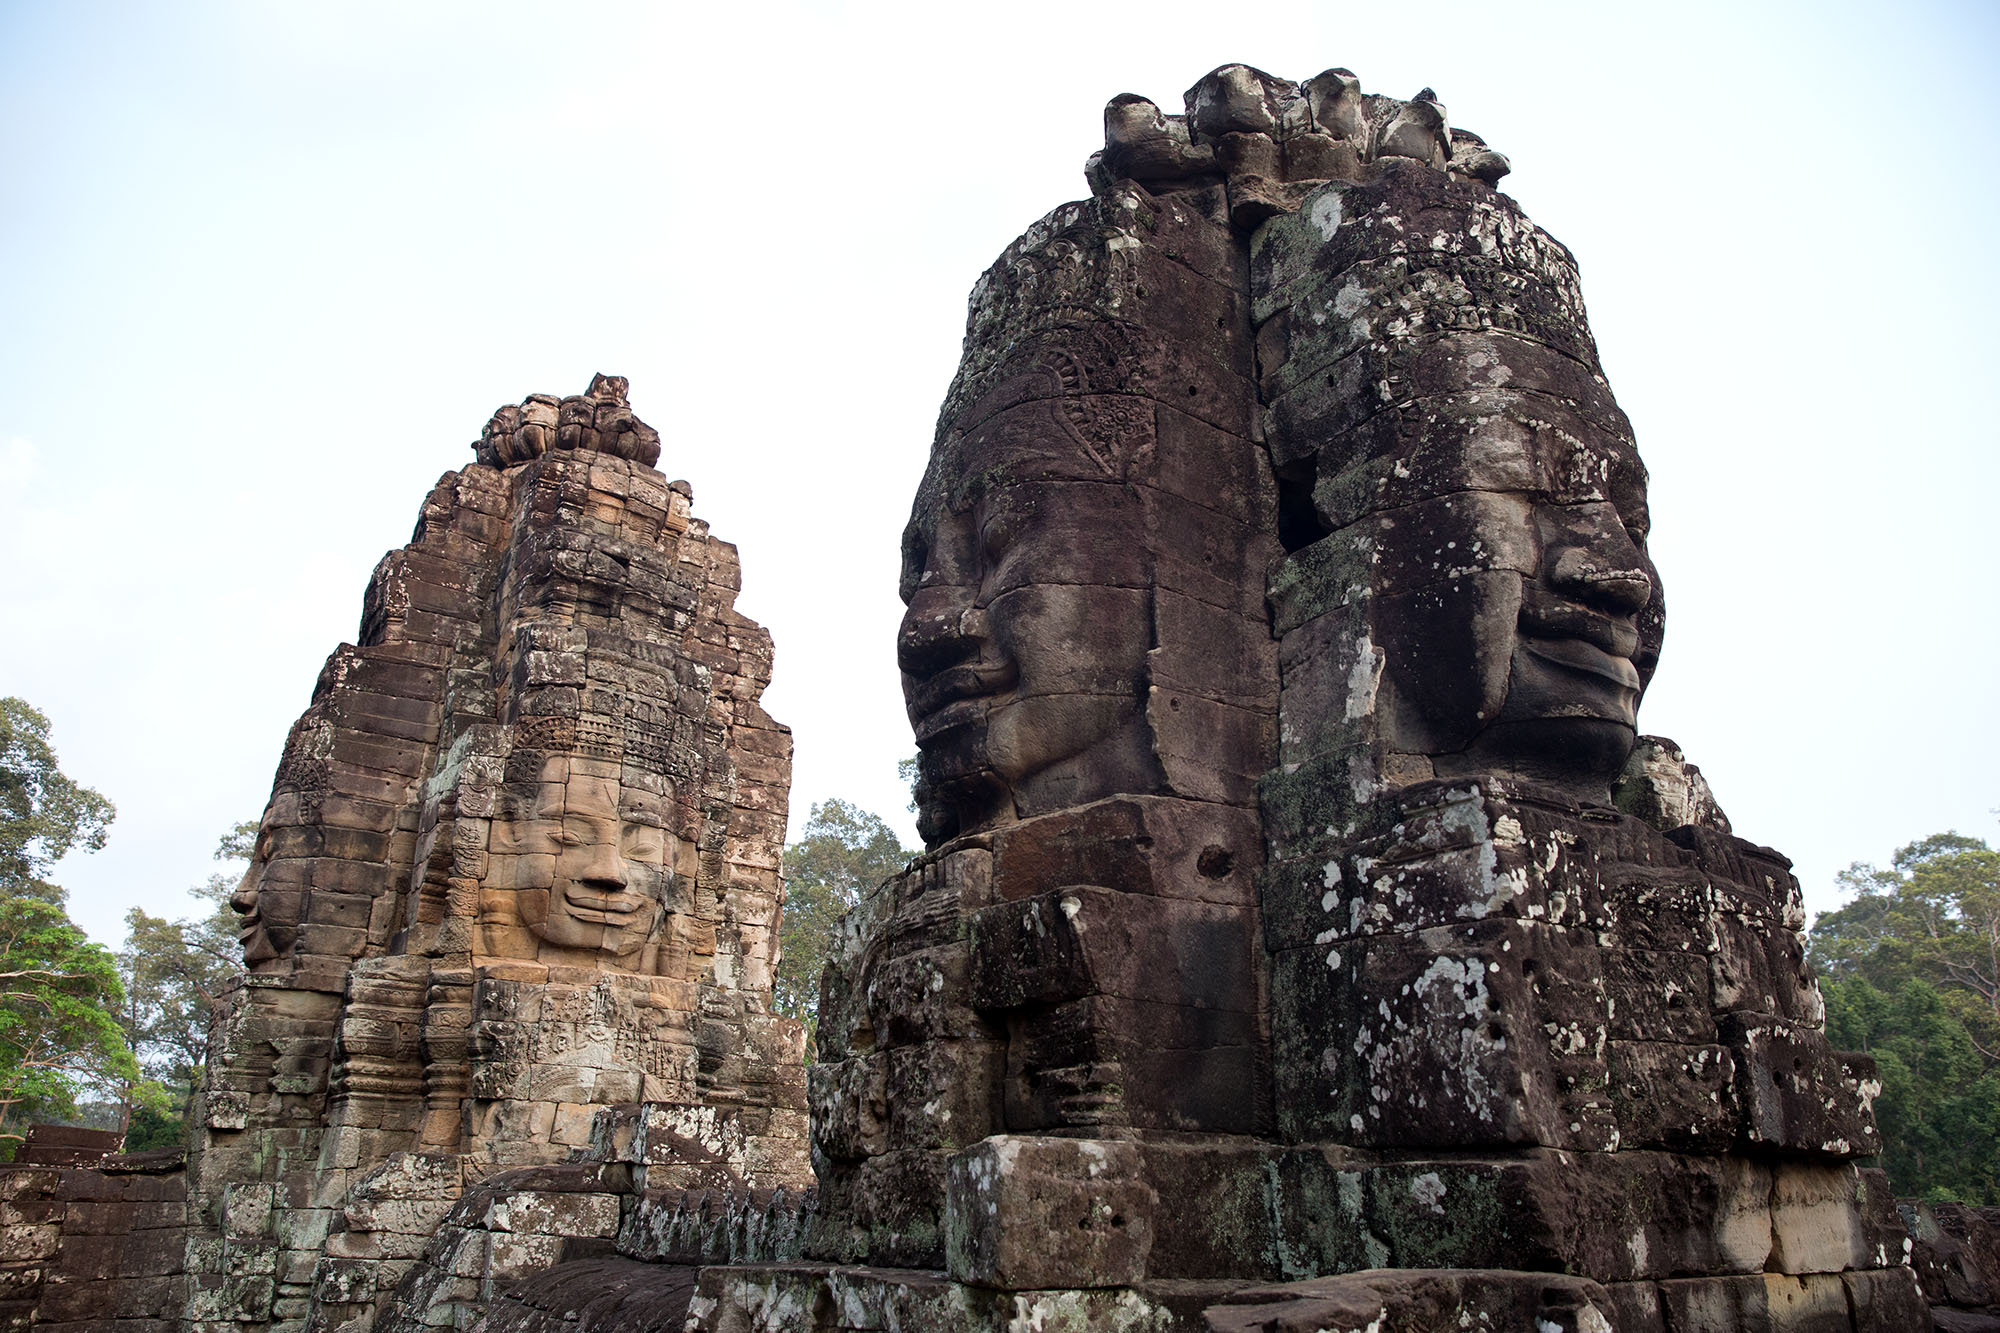 The Bayon is the final stop on the First Lady's visit to Angkor Wat and surrounding temples. (Official White House Photo by Amanda Lucidon)